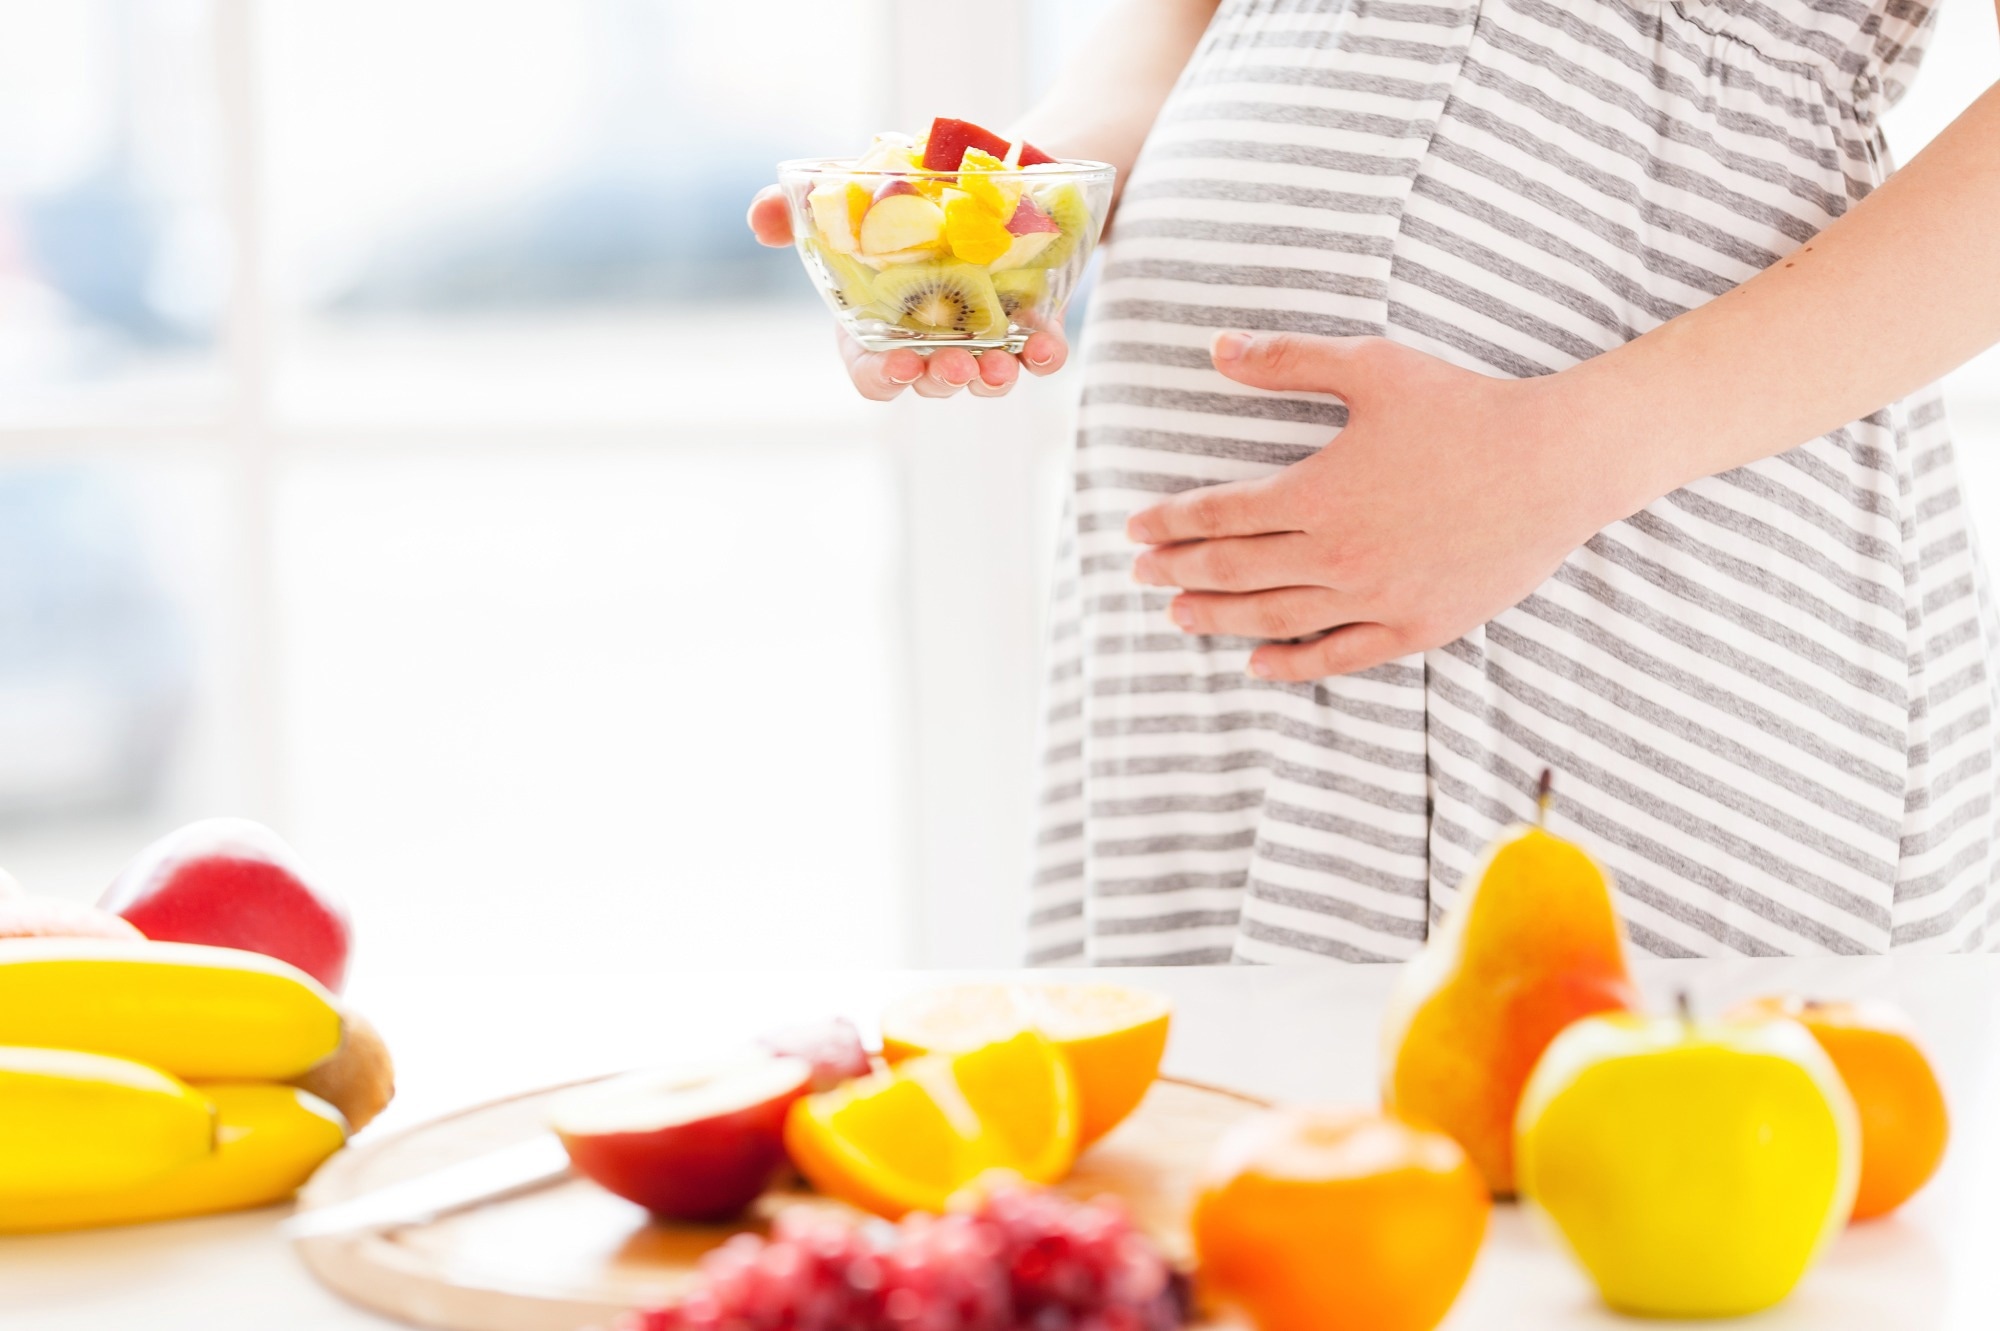 Is there a relationship between maternal diet and gestational age at birth weight?